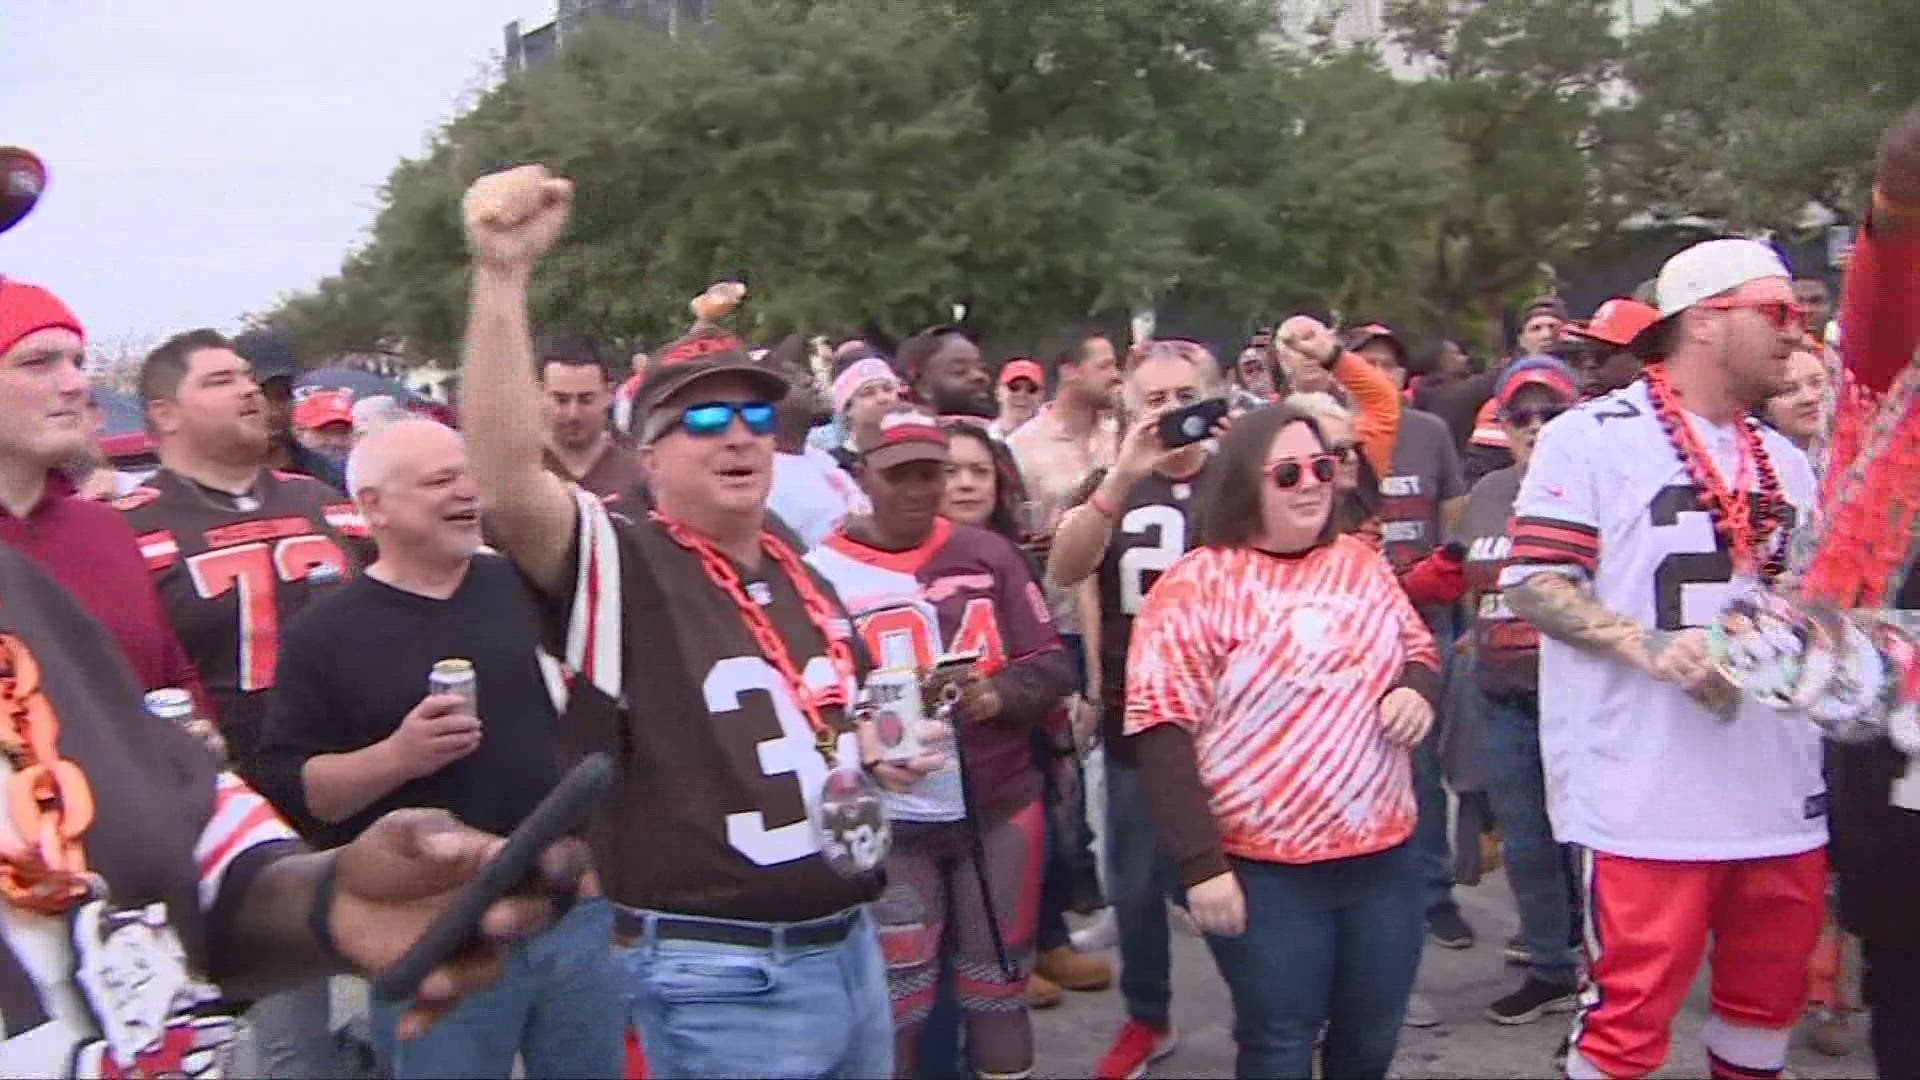 Cleveland Browns fans arrived in Houston to show their support as Deshaun Watson got his first start with the team as quarterback.